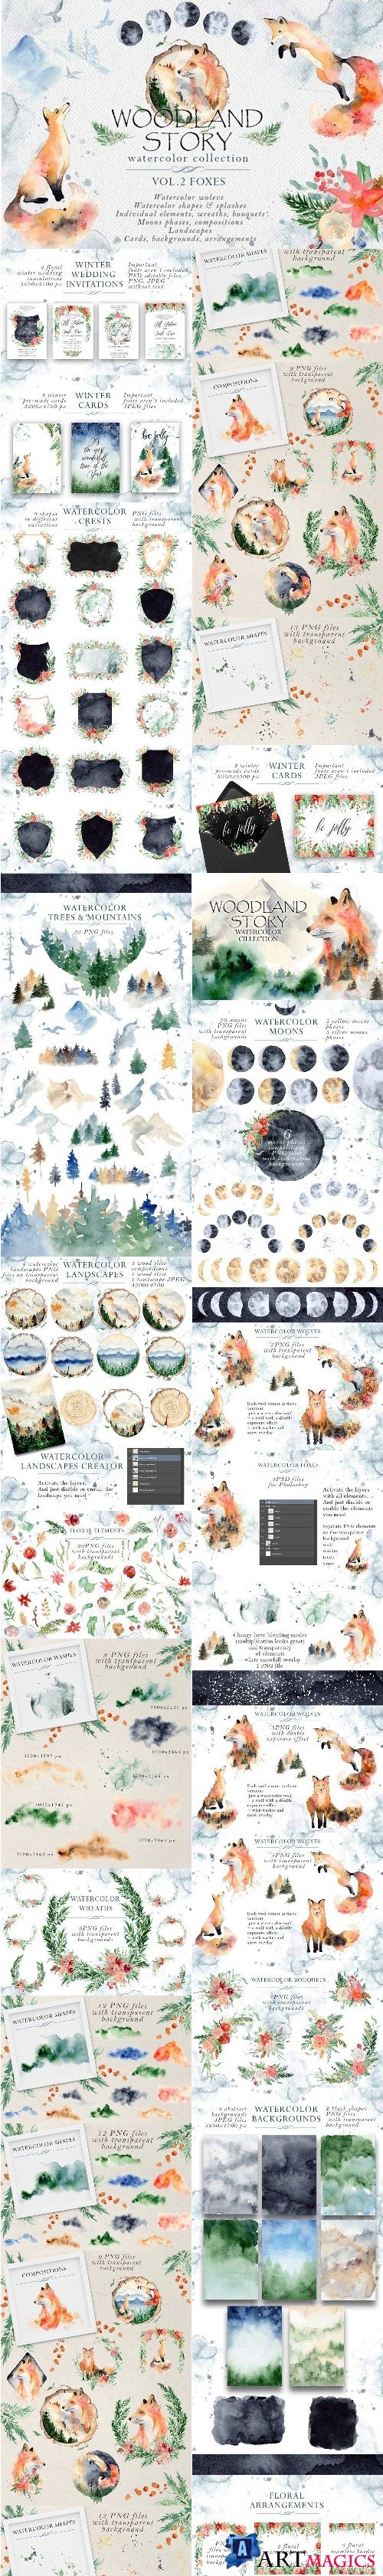 Woodland story Vol.2 Foxes - 4308842